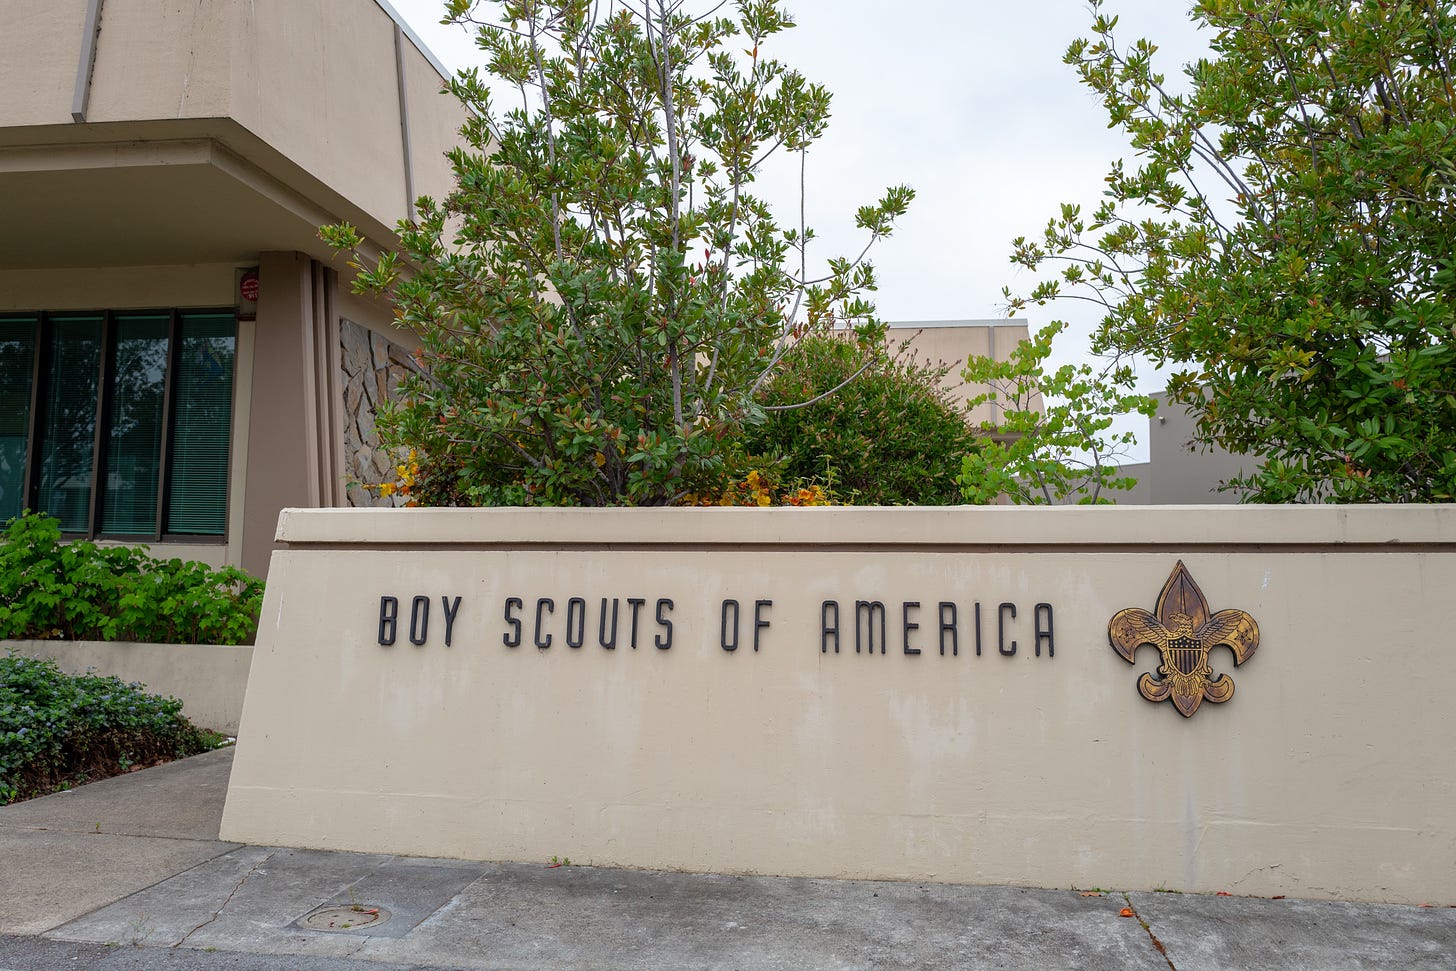 Boy Scout, Cub Scout Membership Drops by 43% From 2019 to 2020